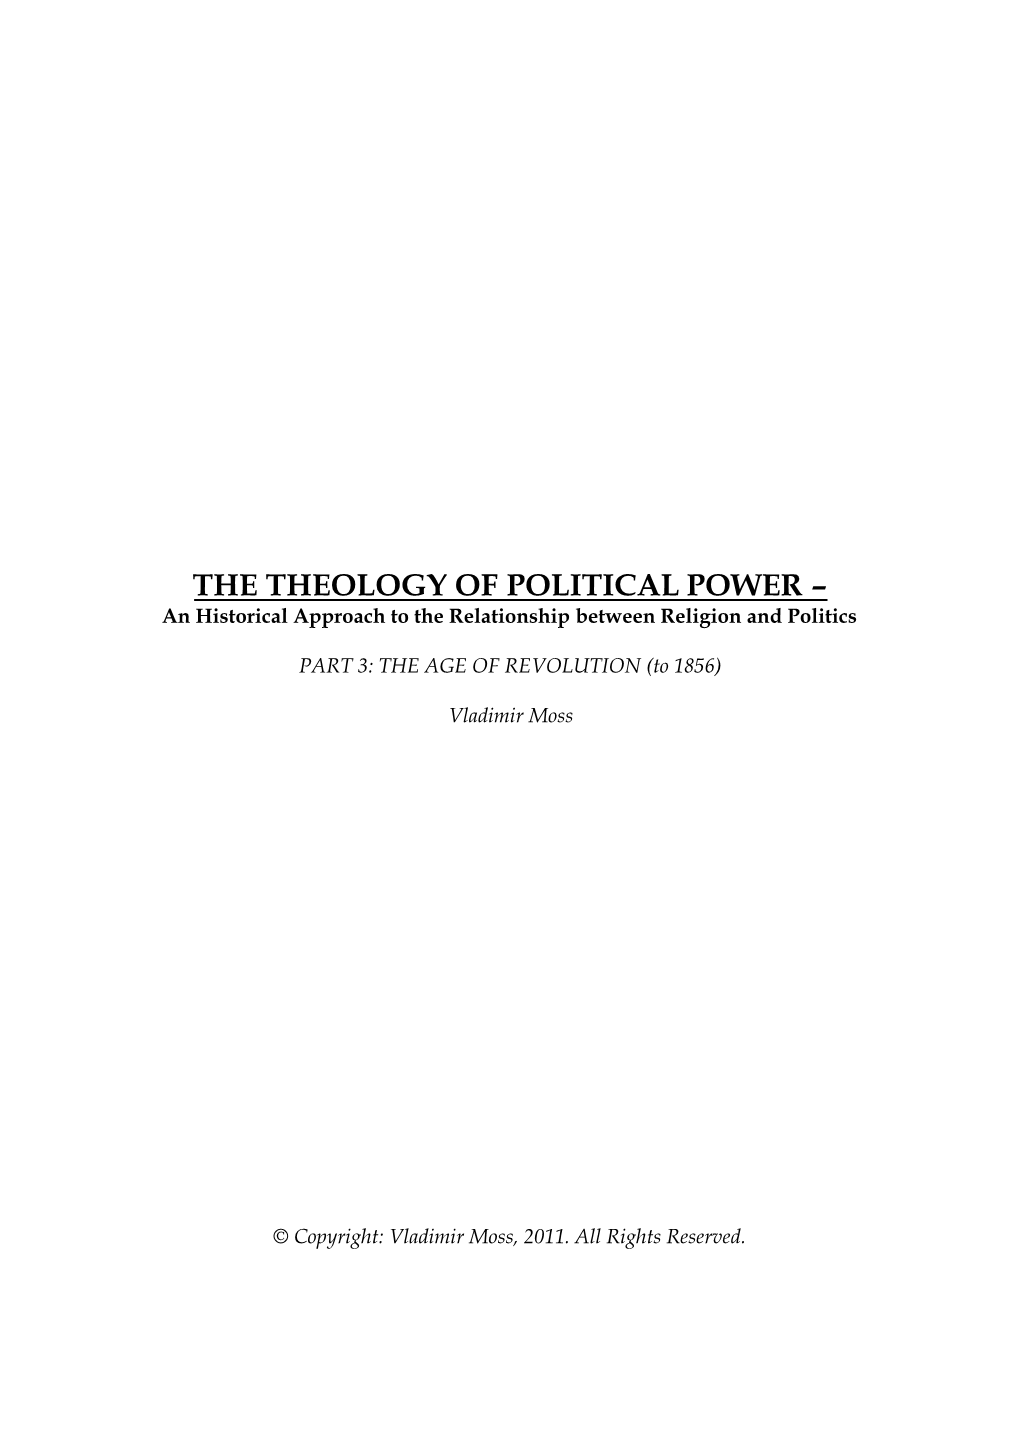 THE THEOLOGY of POLITICAL POWER – an Historical Approach to the Relationship Between Religion and Politics